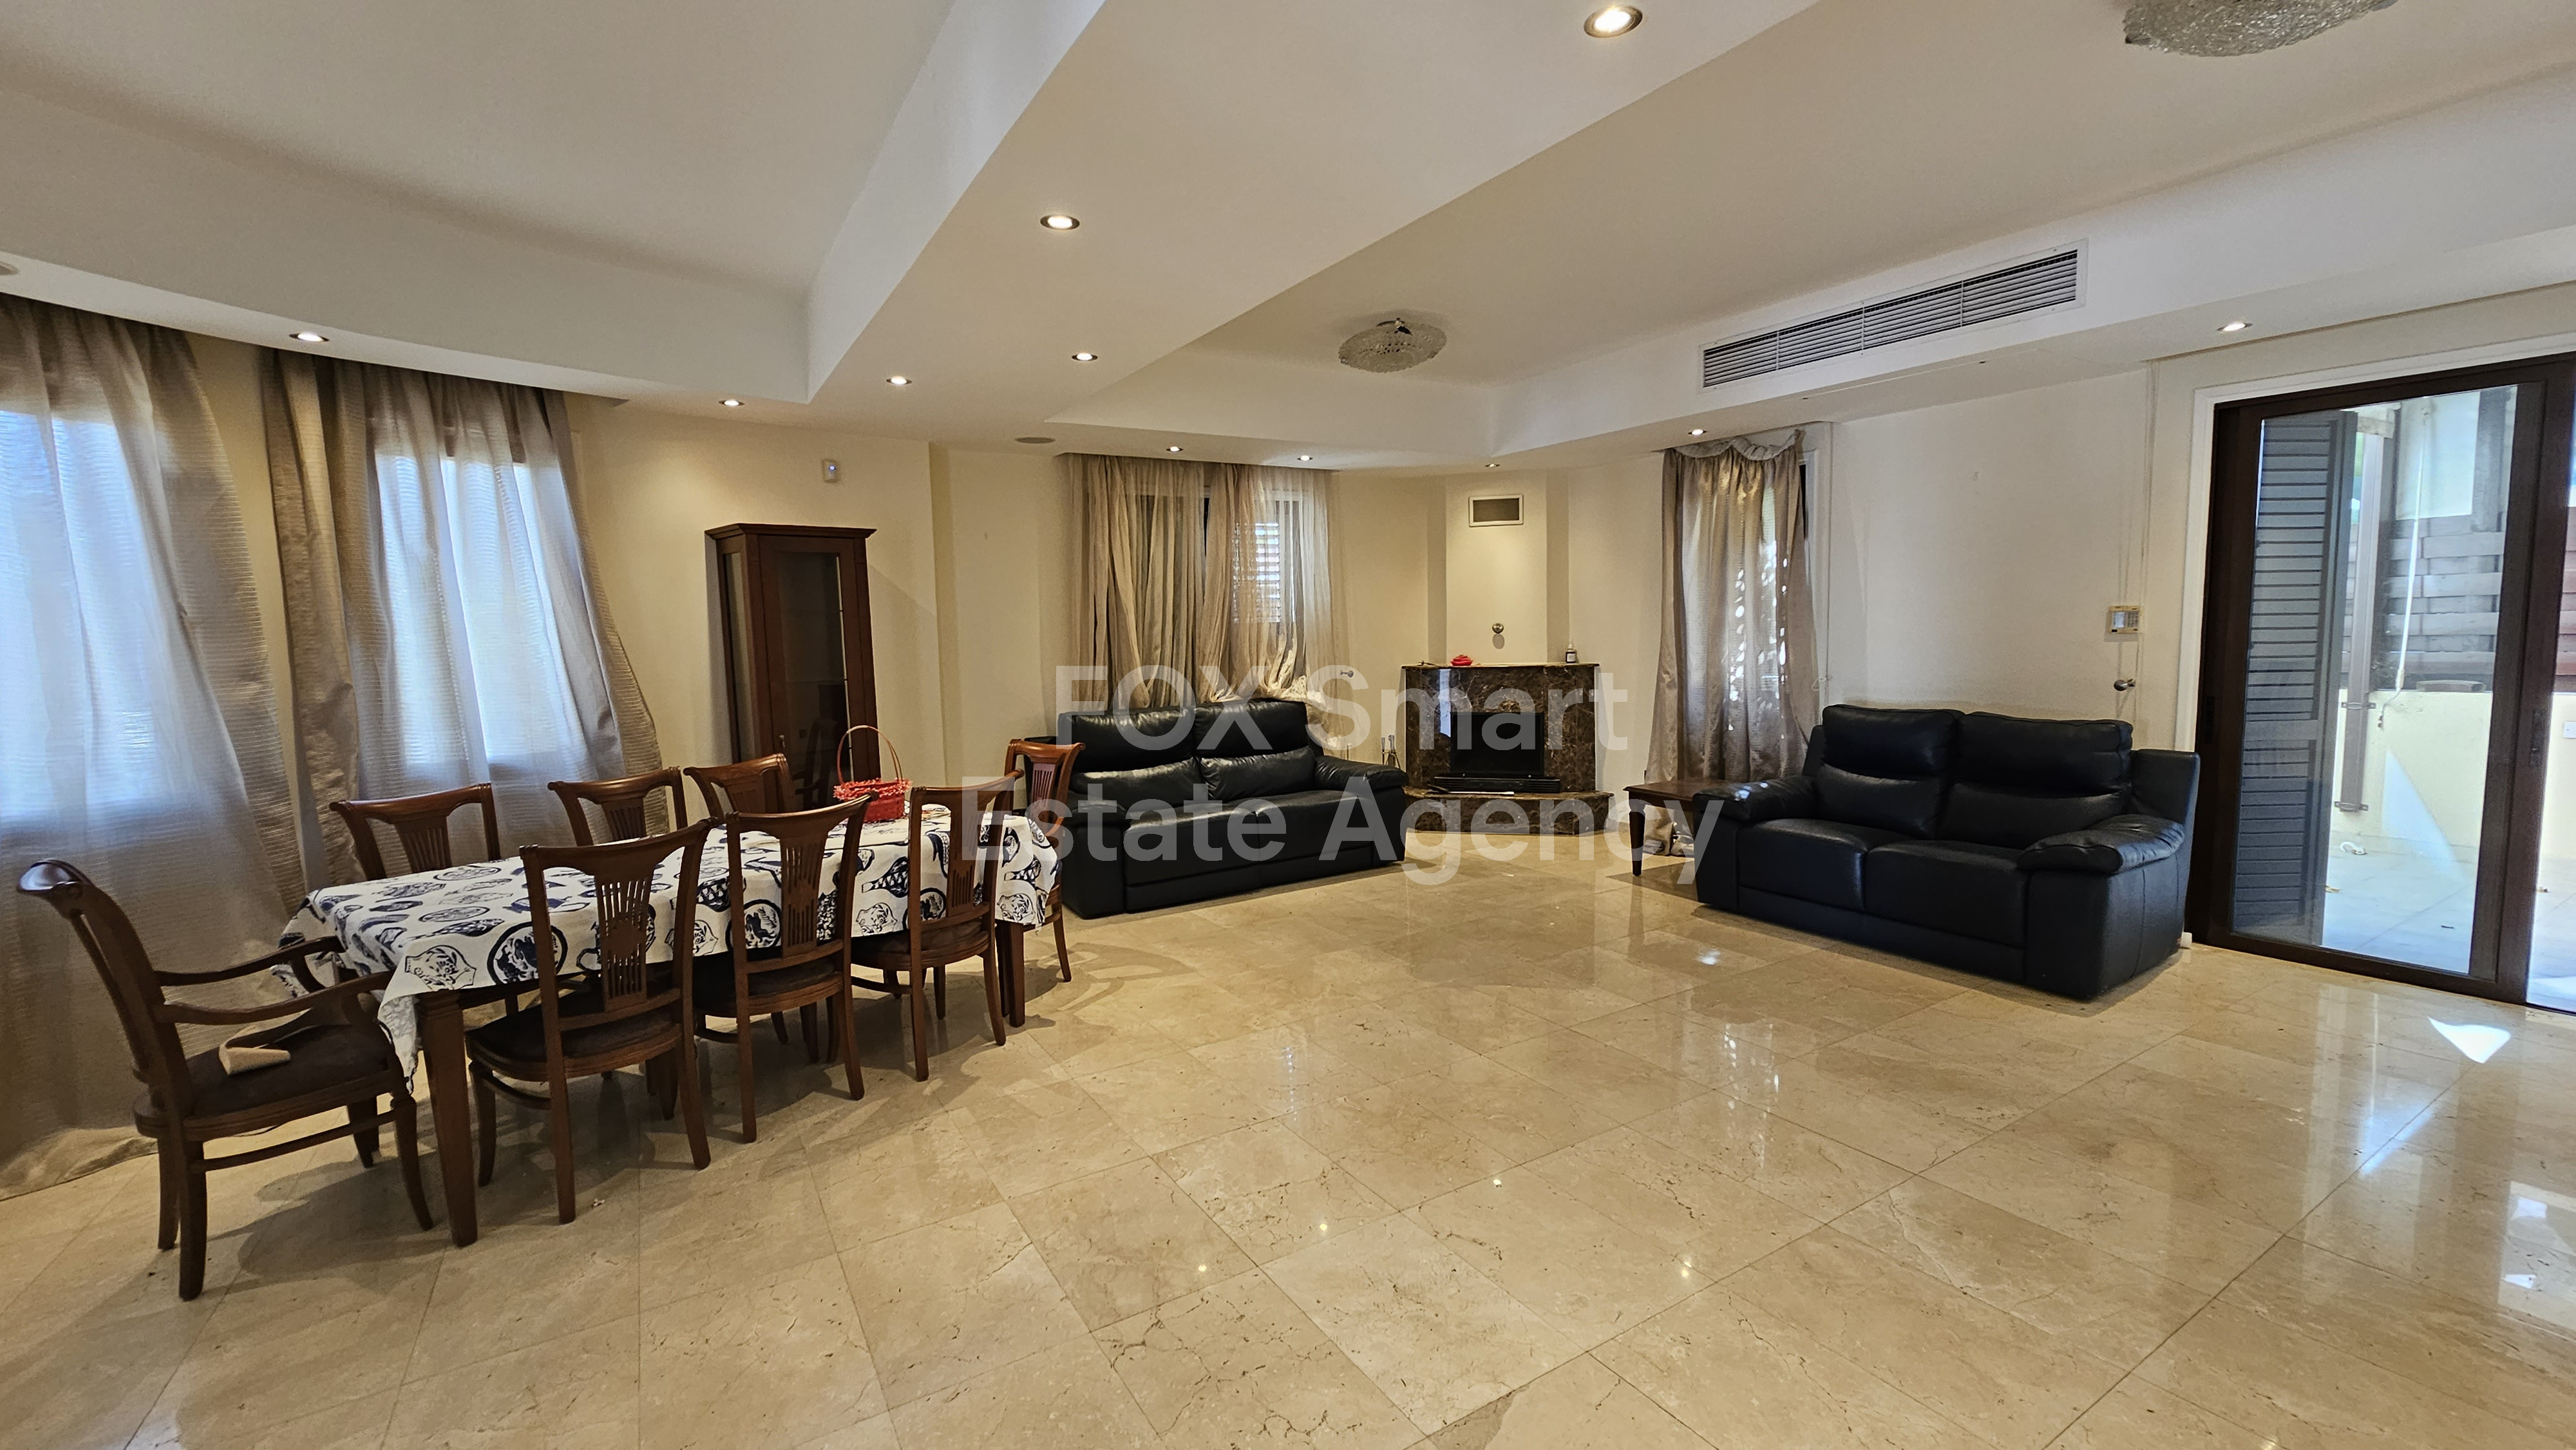 House, For Sale, Nicosia, Strovolos  3 Bedrooms 2 Bathrooms.....